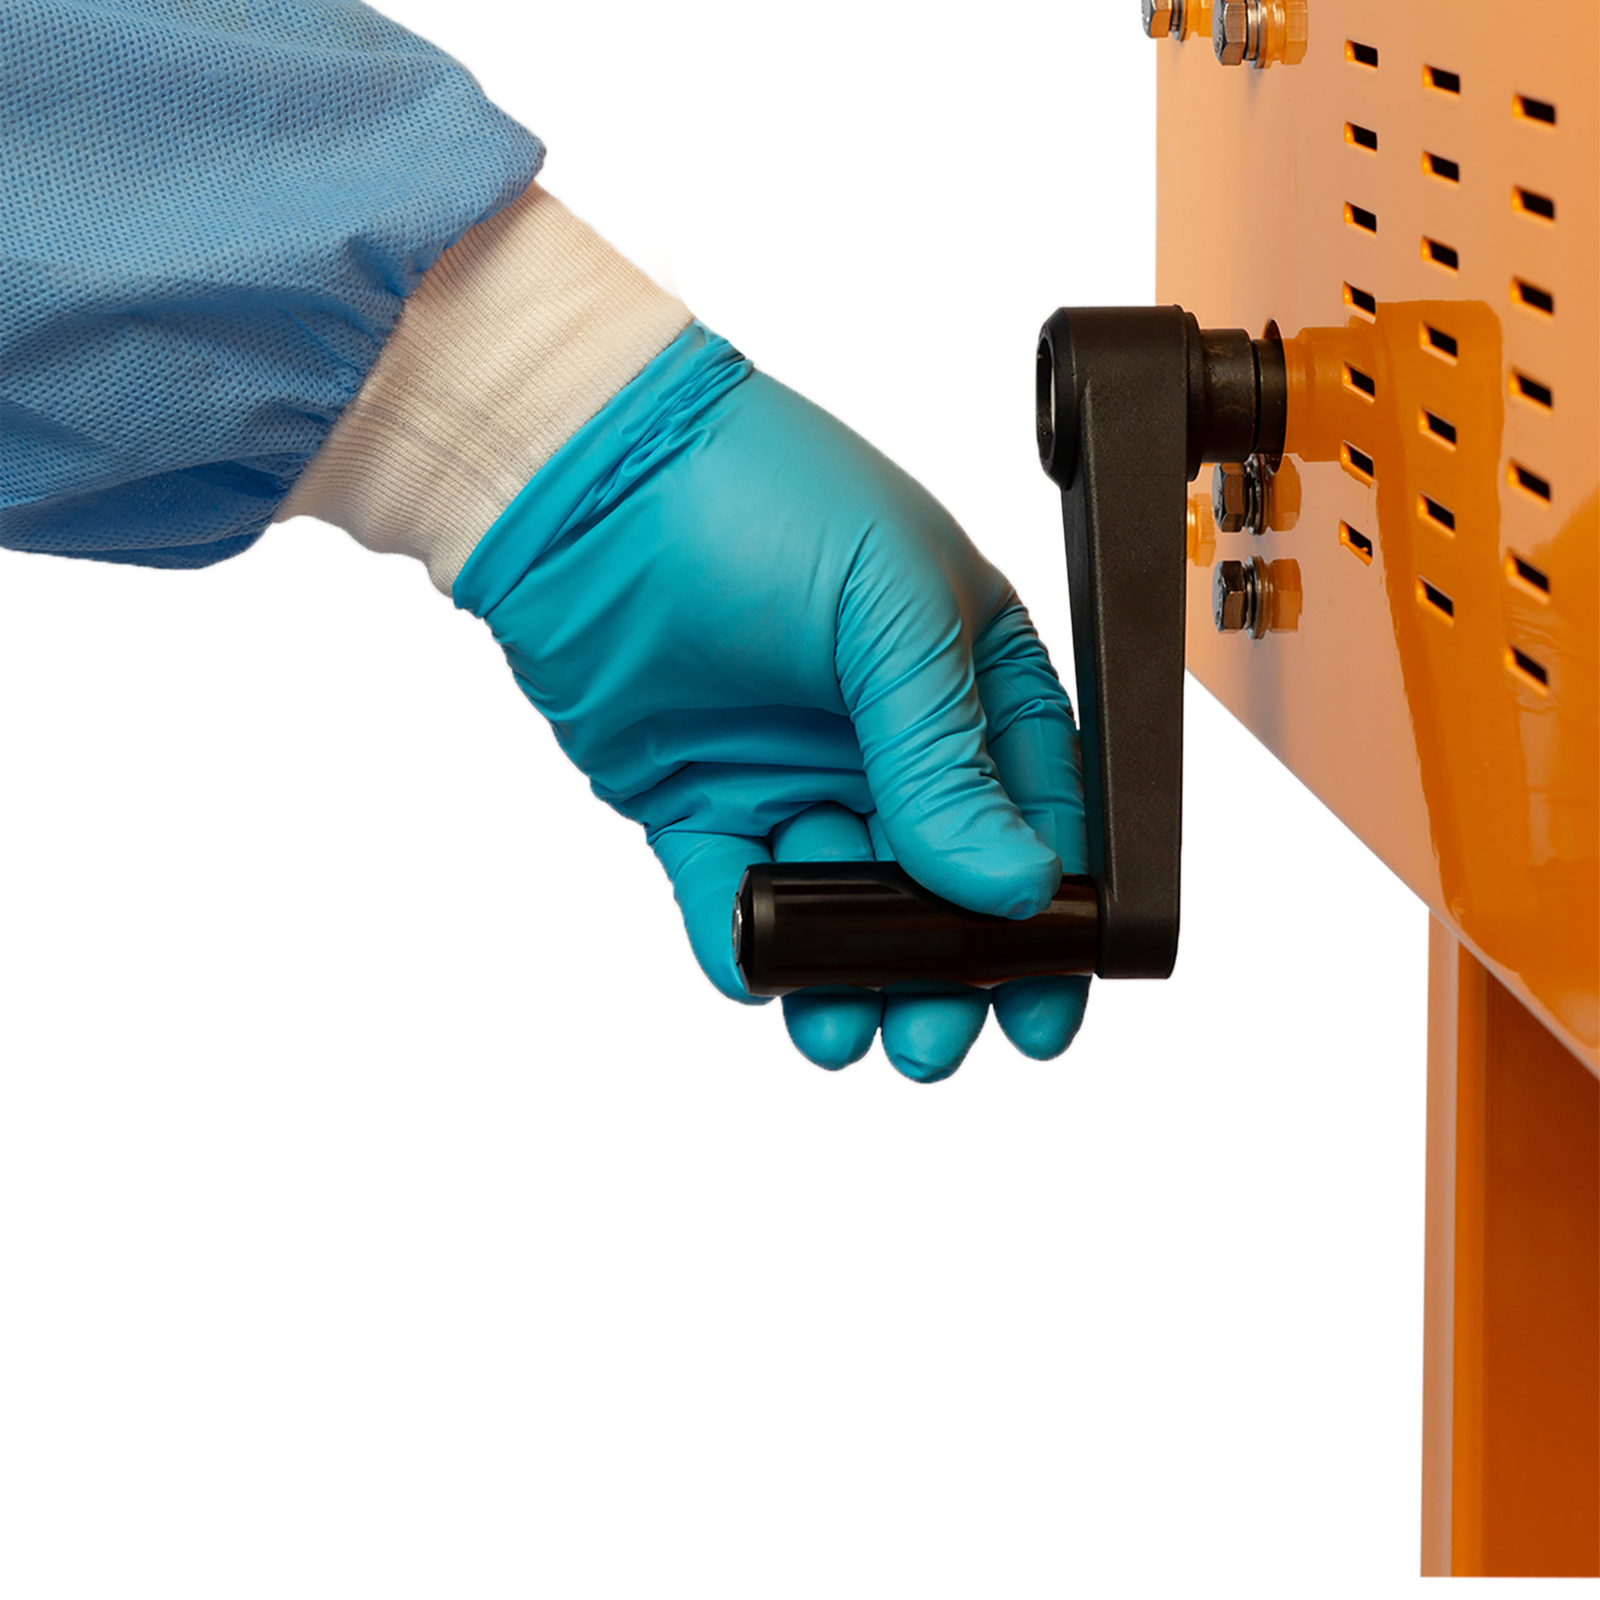 Operator wearing blue gloves adjusting the height of the sealing machine with the black removable handle before starting production